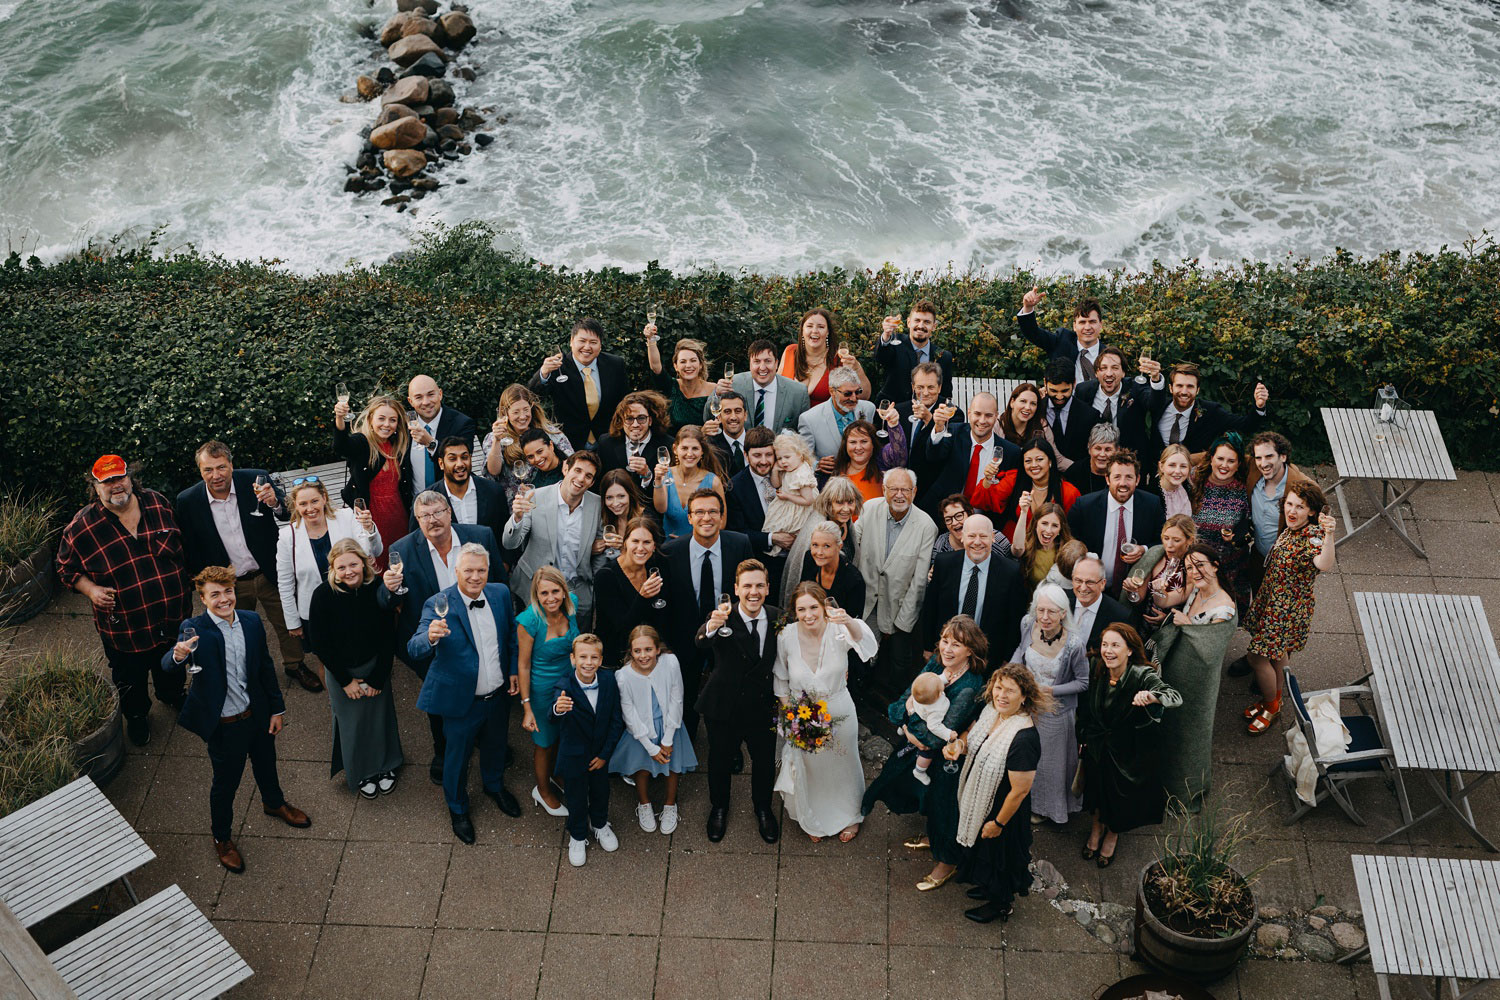 Celebratory atmosphere in a group photo featuring the bride, groom, and their loved ones at Helenekilde Badehotel